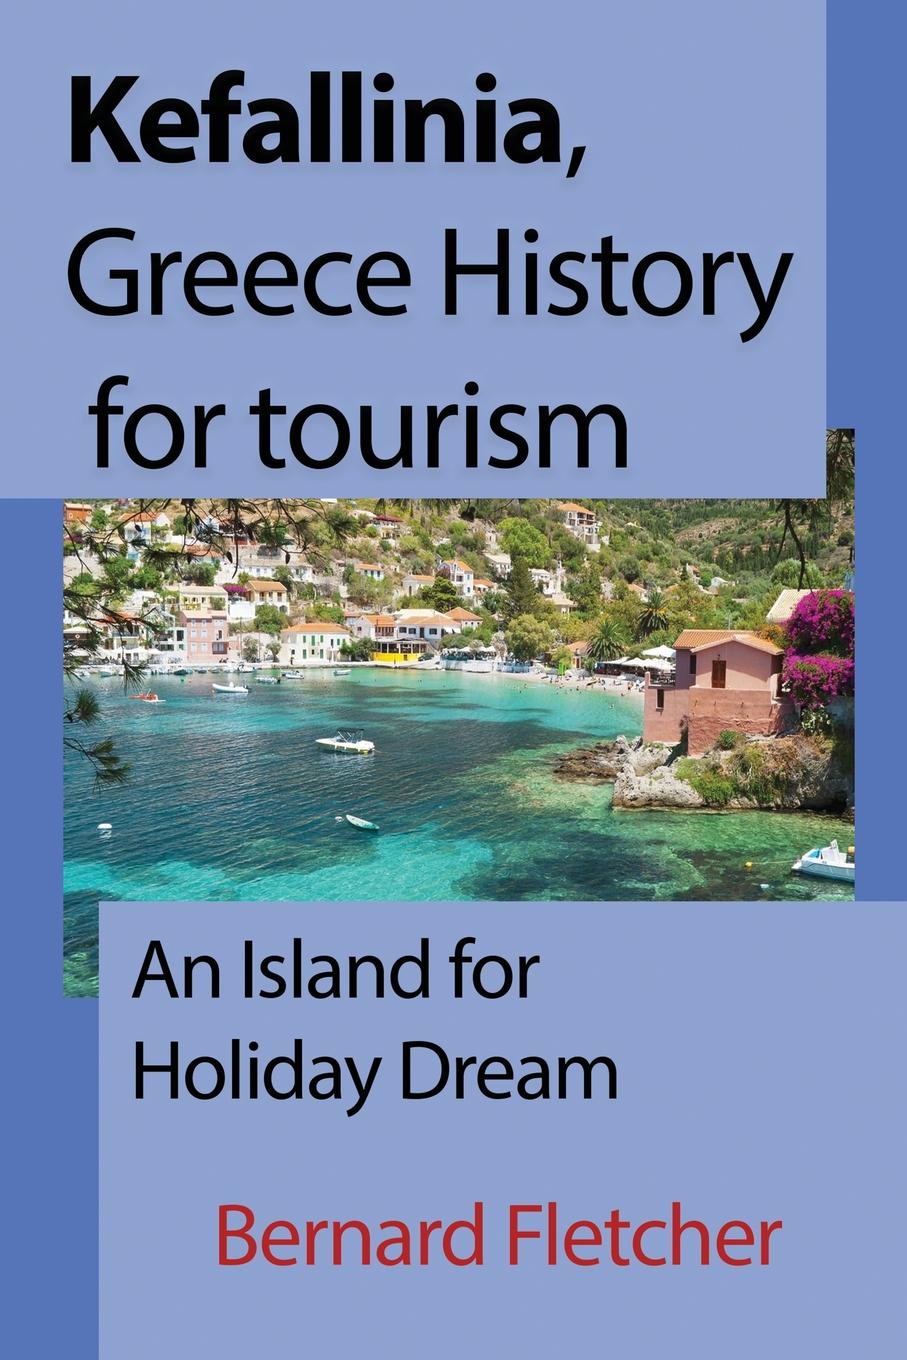 Kefallinia, Greece History for tourism. An Island for Holiday Dream